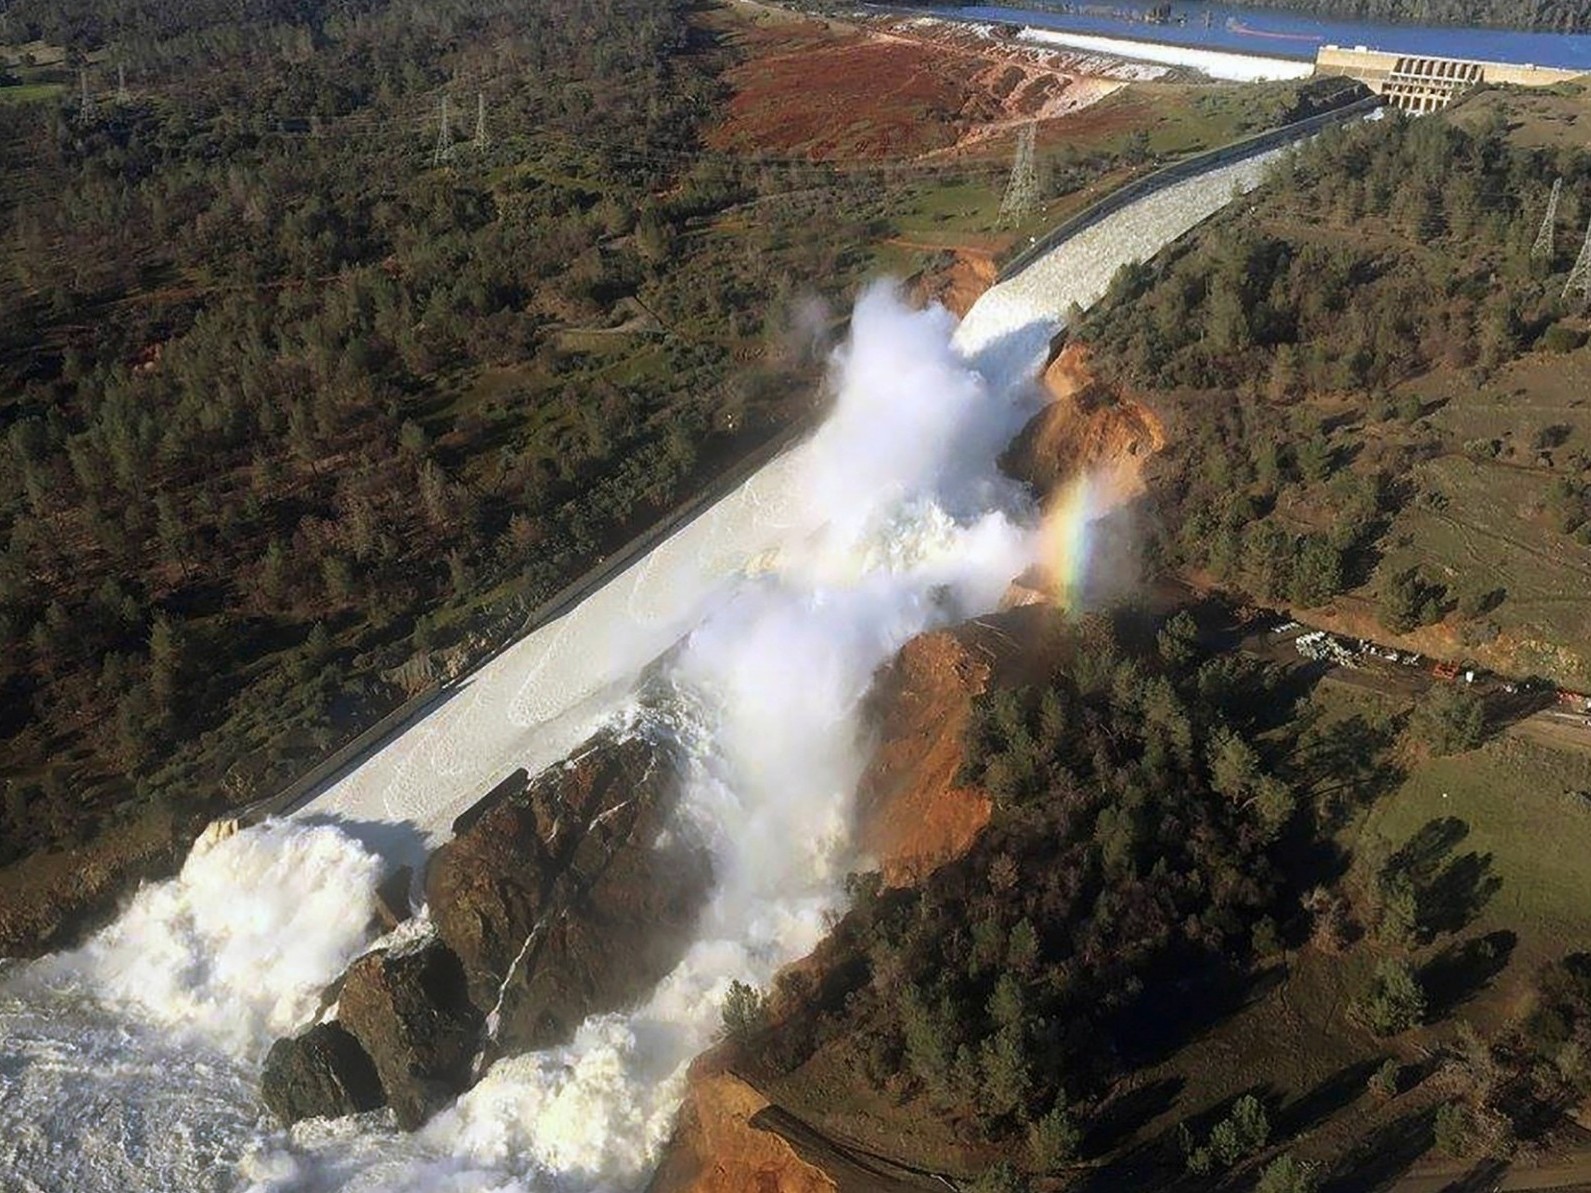 Oroville dam spillway in February 2017